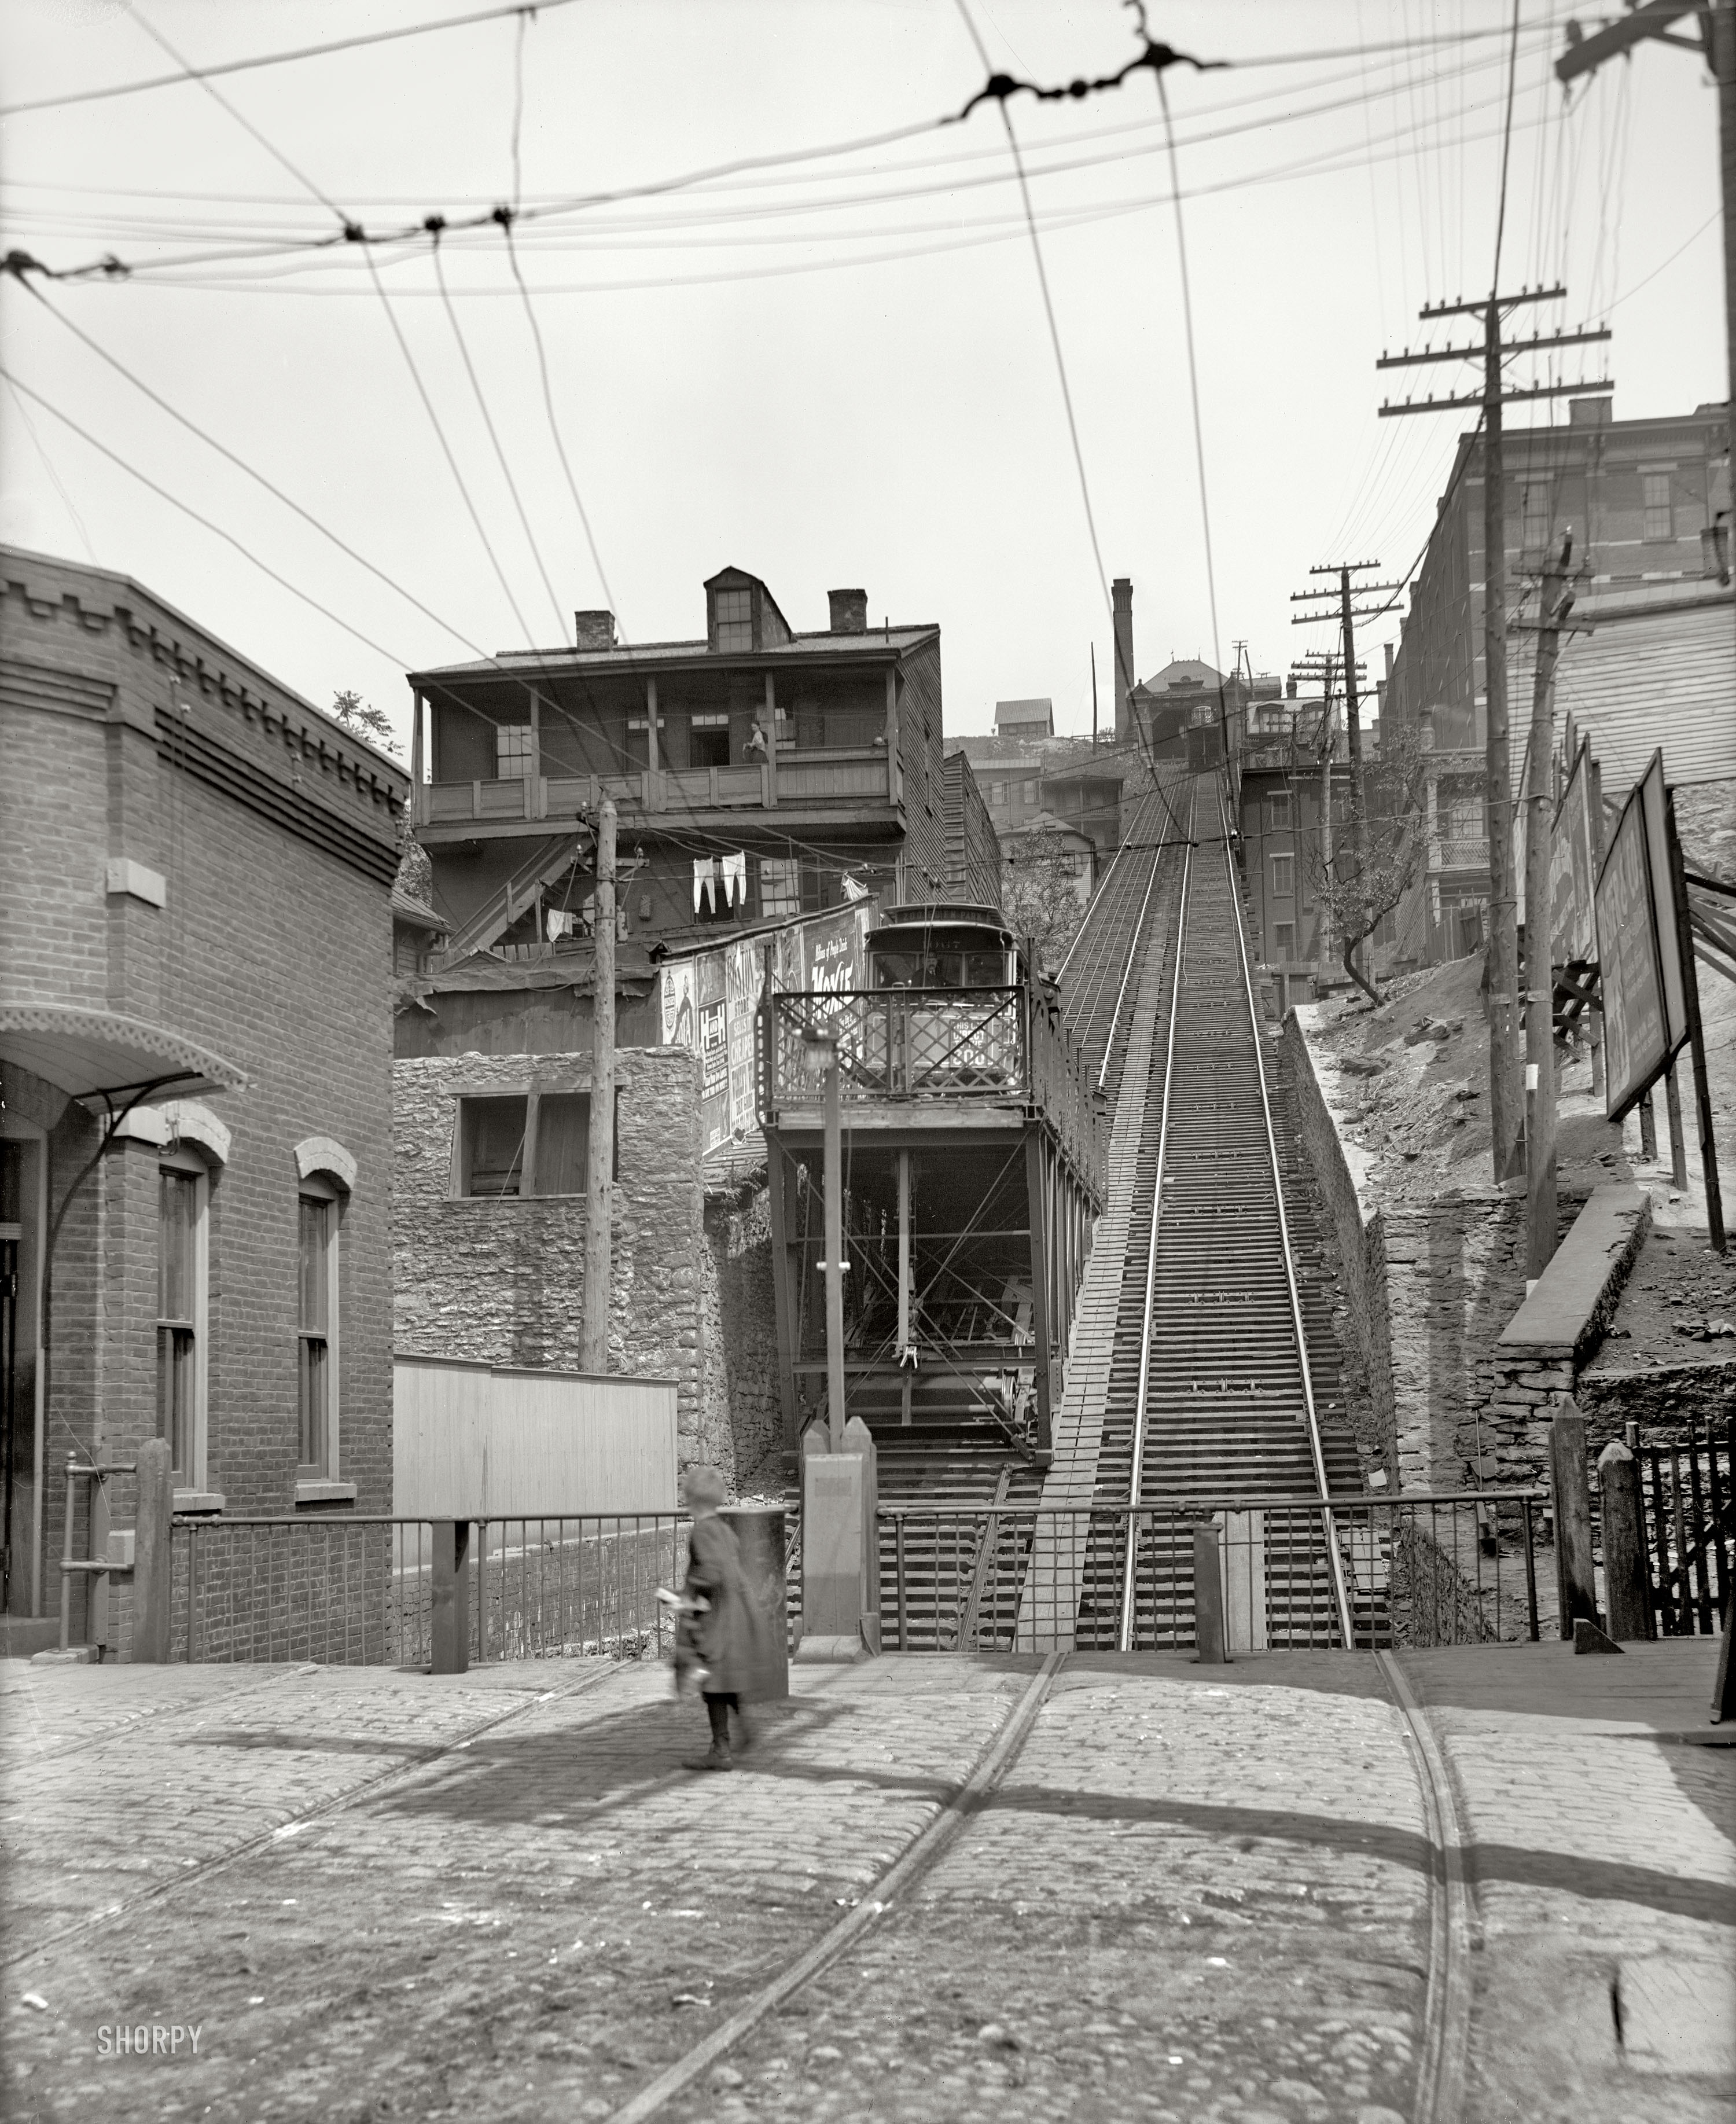 Cincinnati, Ohio, circa 1906. "Mount Adams incline." A closeup of one of Cincy's famous incline railway lines, and of a lesser-known clothesline. Also: Moxie! 8x10 inch dry plate glass negative, Detroit Publishing Company. View full size.